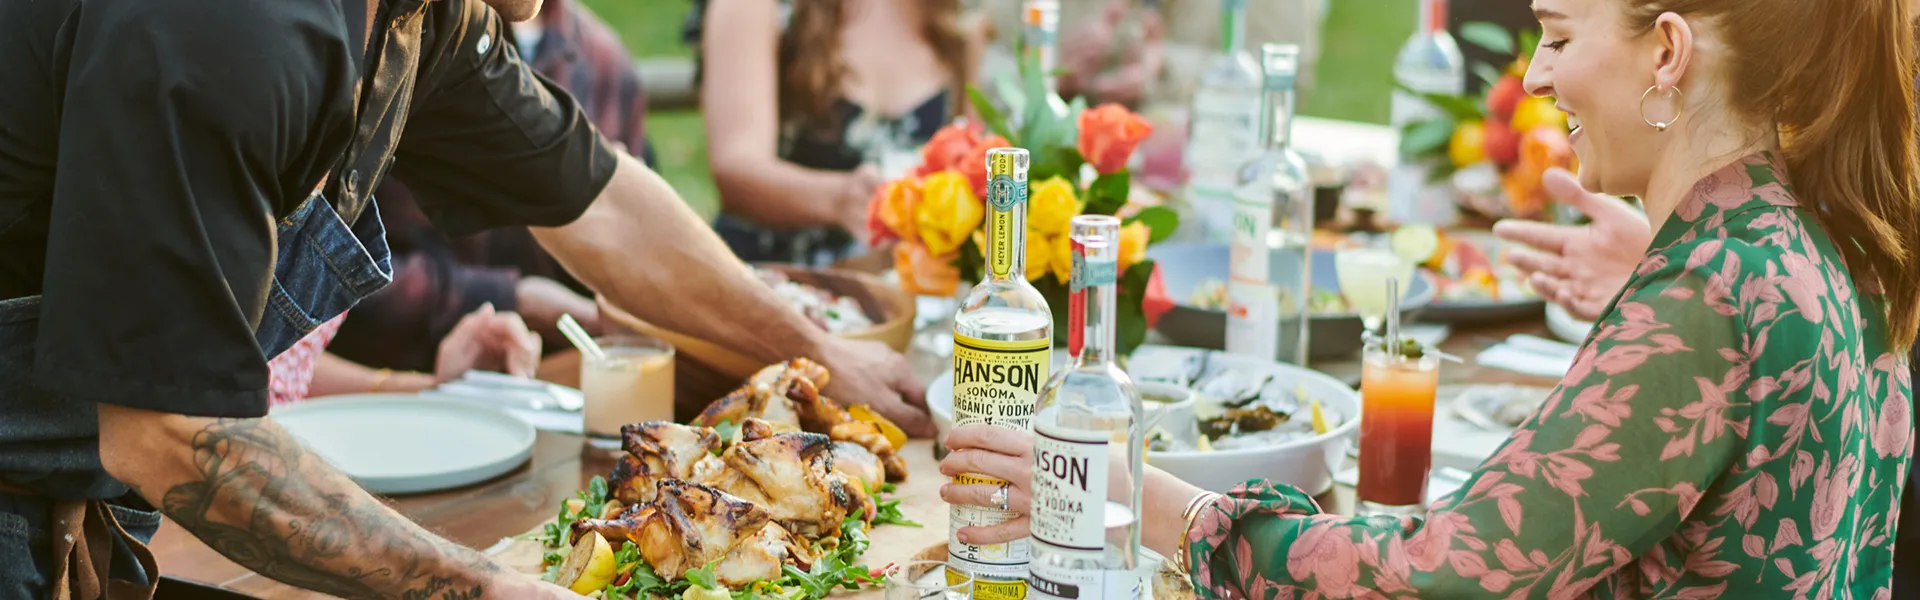 Chef serving platter of food for guests drinking hanson vodka